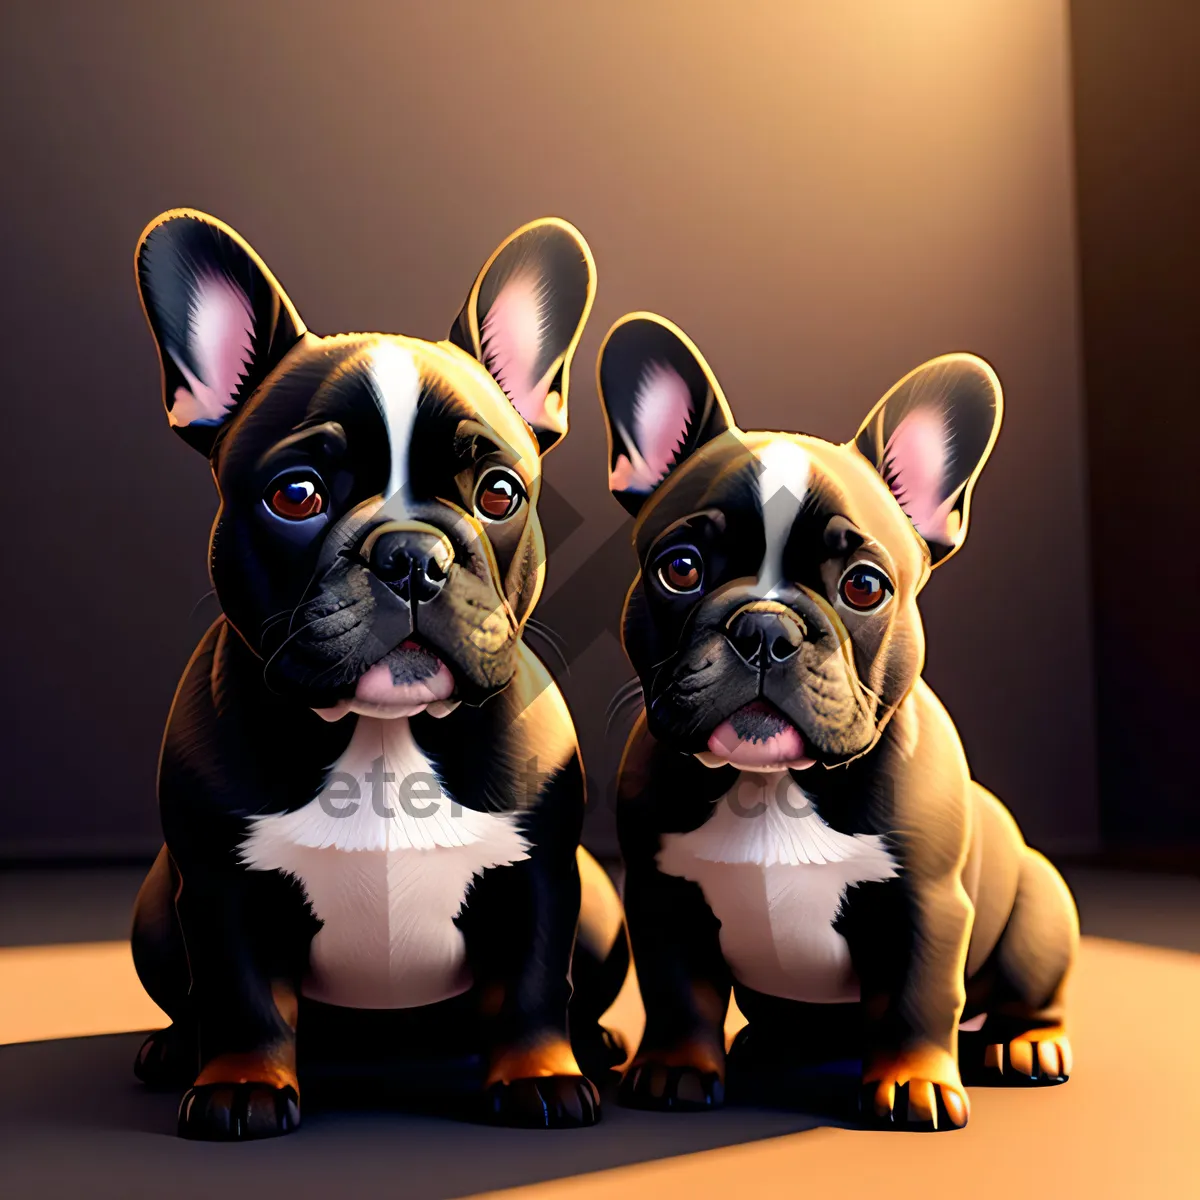 Picture of Charming bulldog puppies captured in an endearing studio portrait